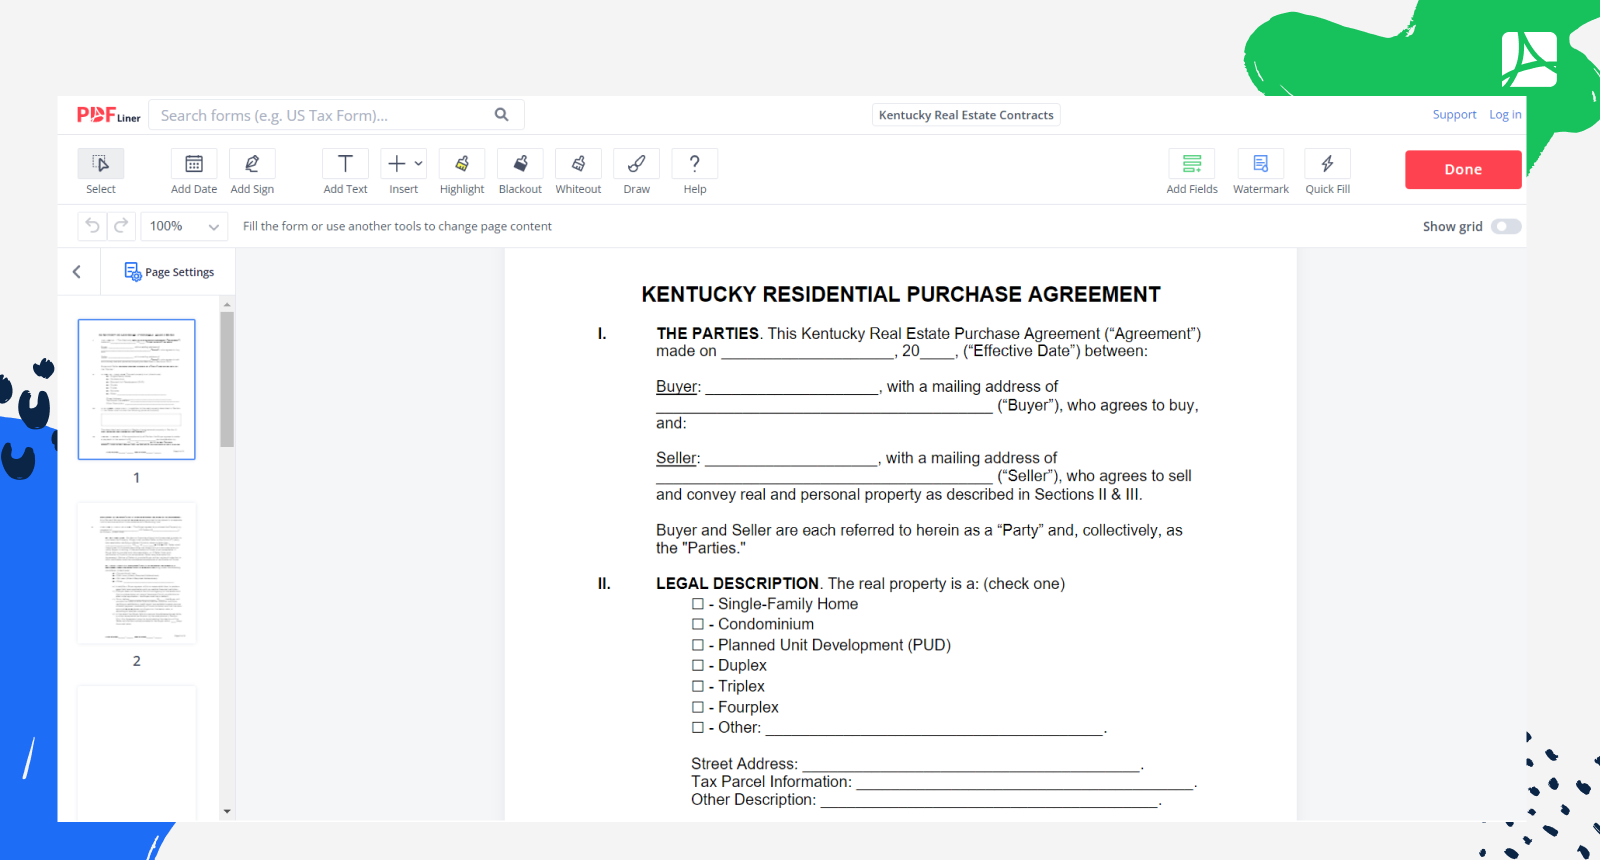 Kentucky Real Estate Contracts Form Screenshot